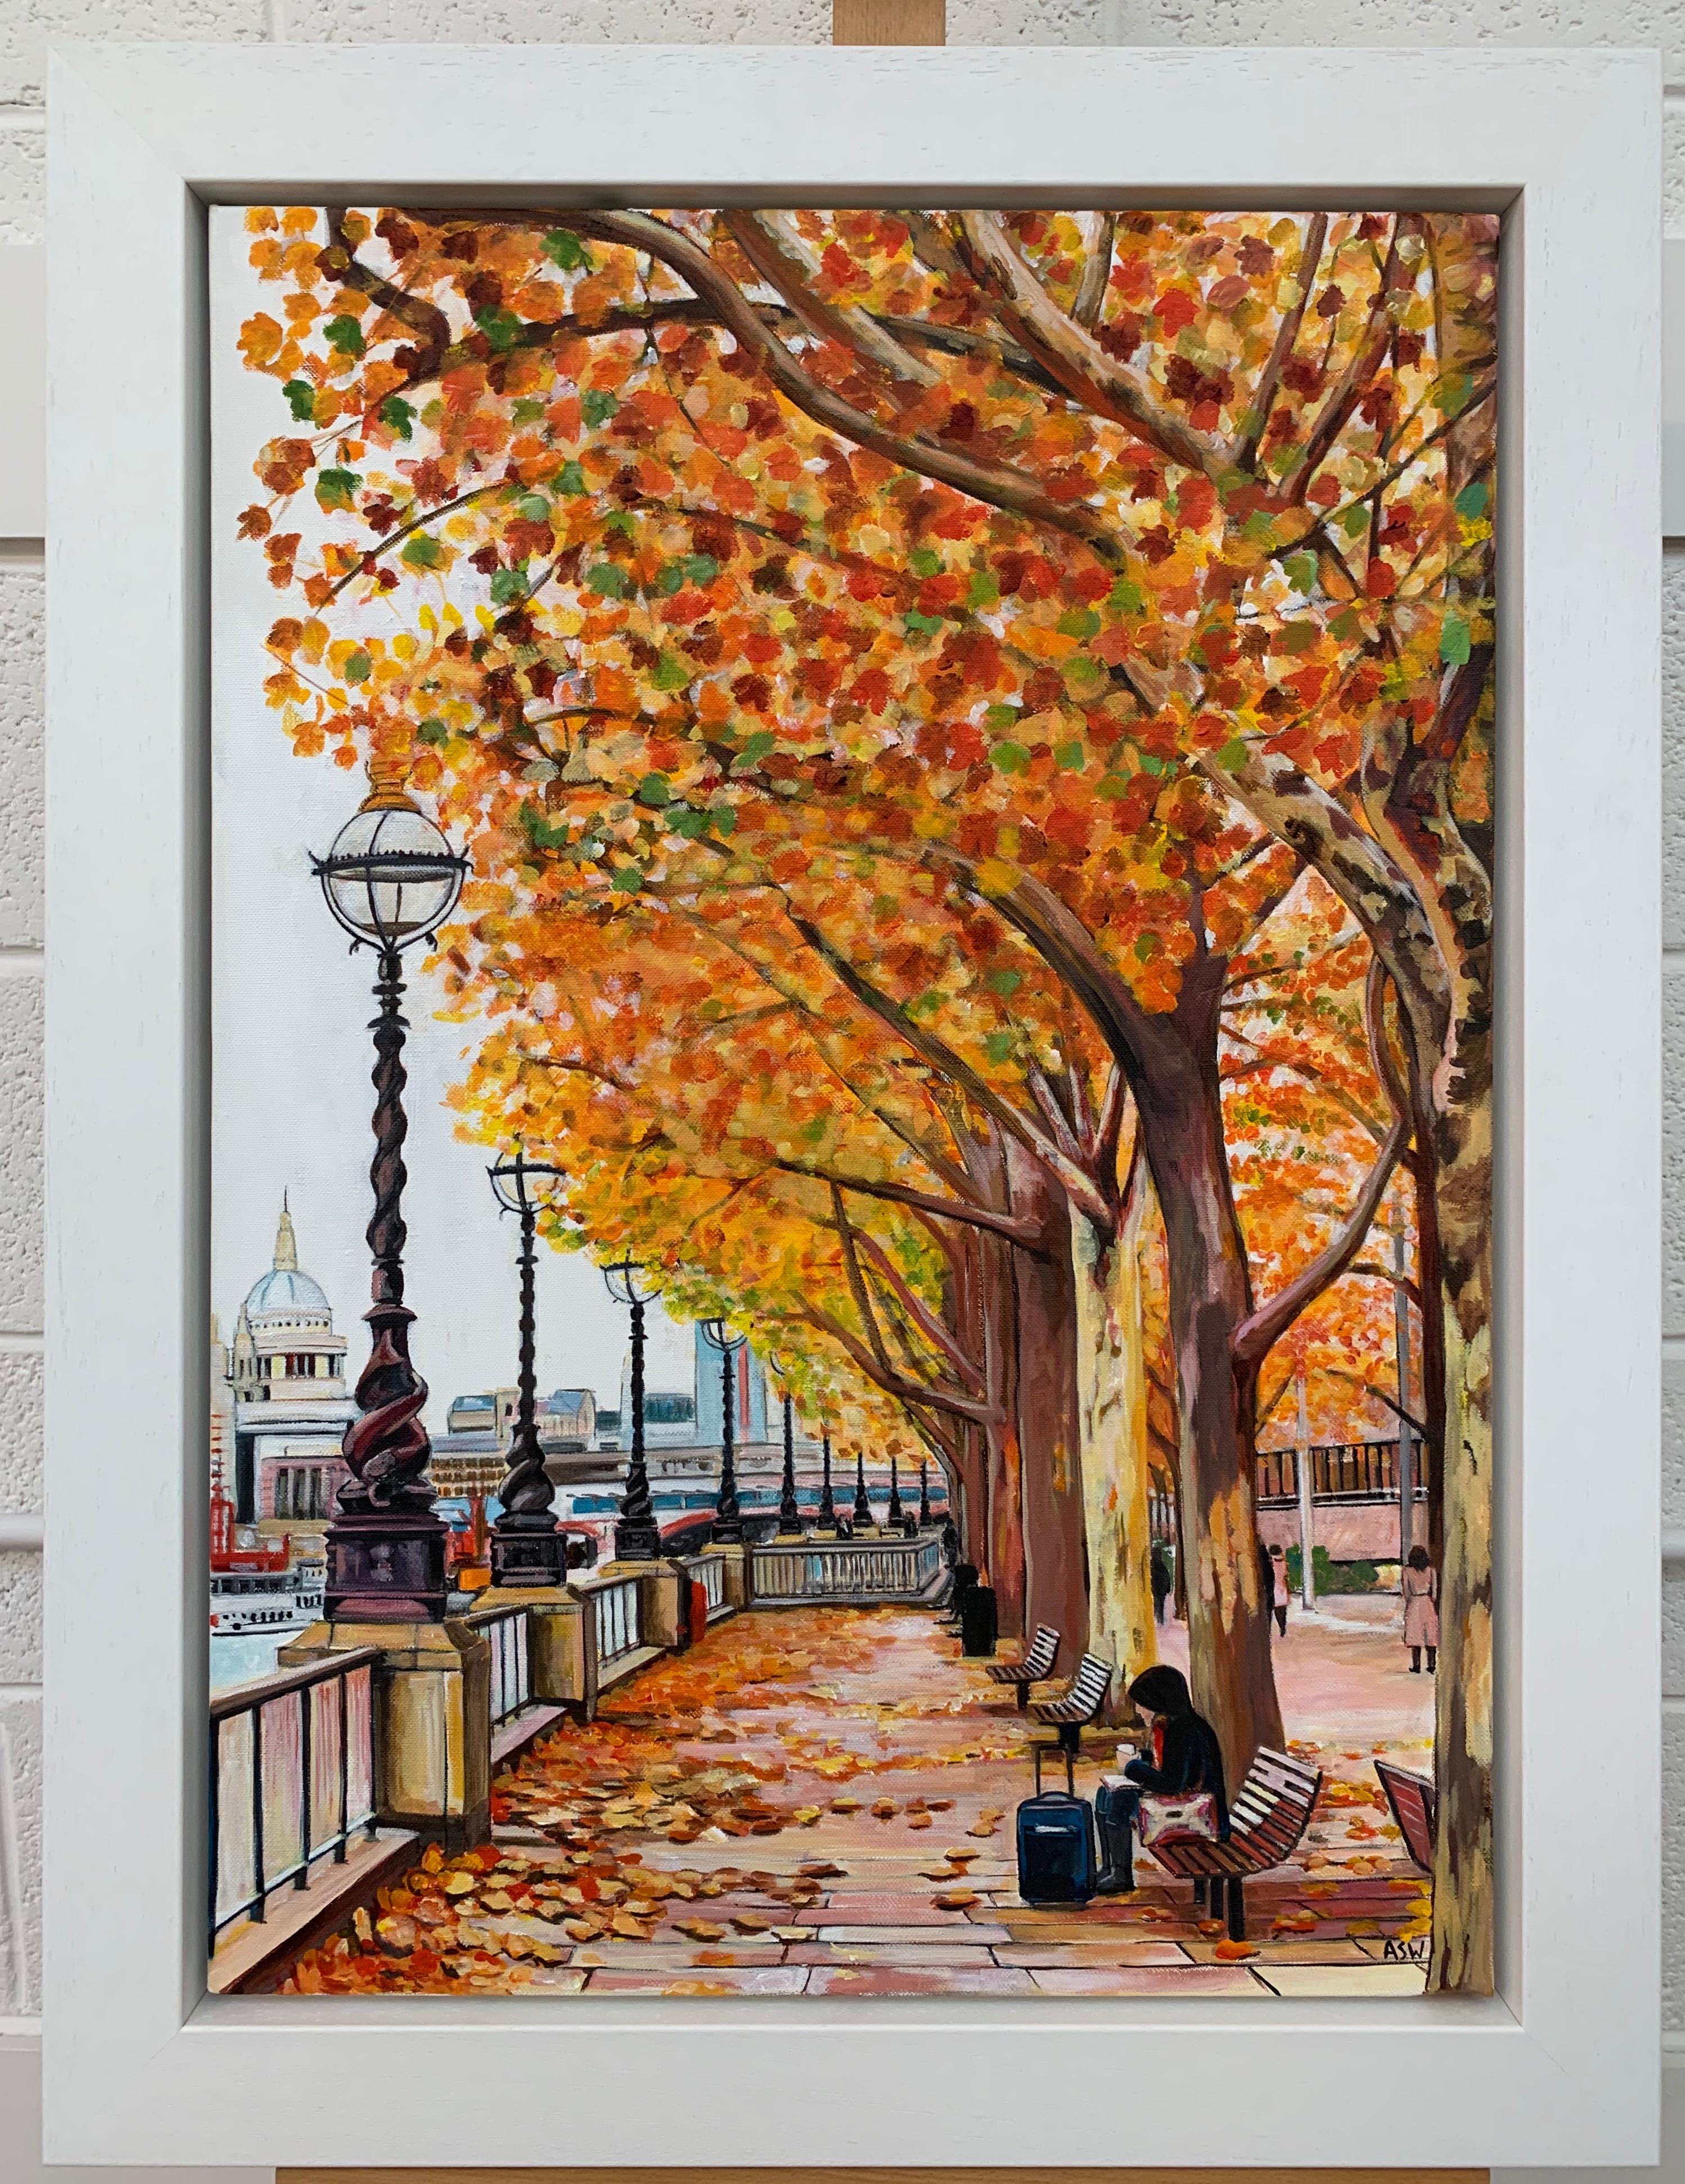 Contemporary Realism Painting of Victoria Embankment London in Autumn by Collectible British Artist.

Art measures 20 x 28 inches
Frame measures 26 x 34 inches

Angela Wakefield has twice been on the front cover of ‘Art of England’ and featured in